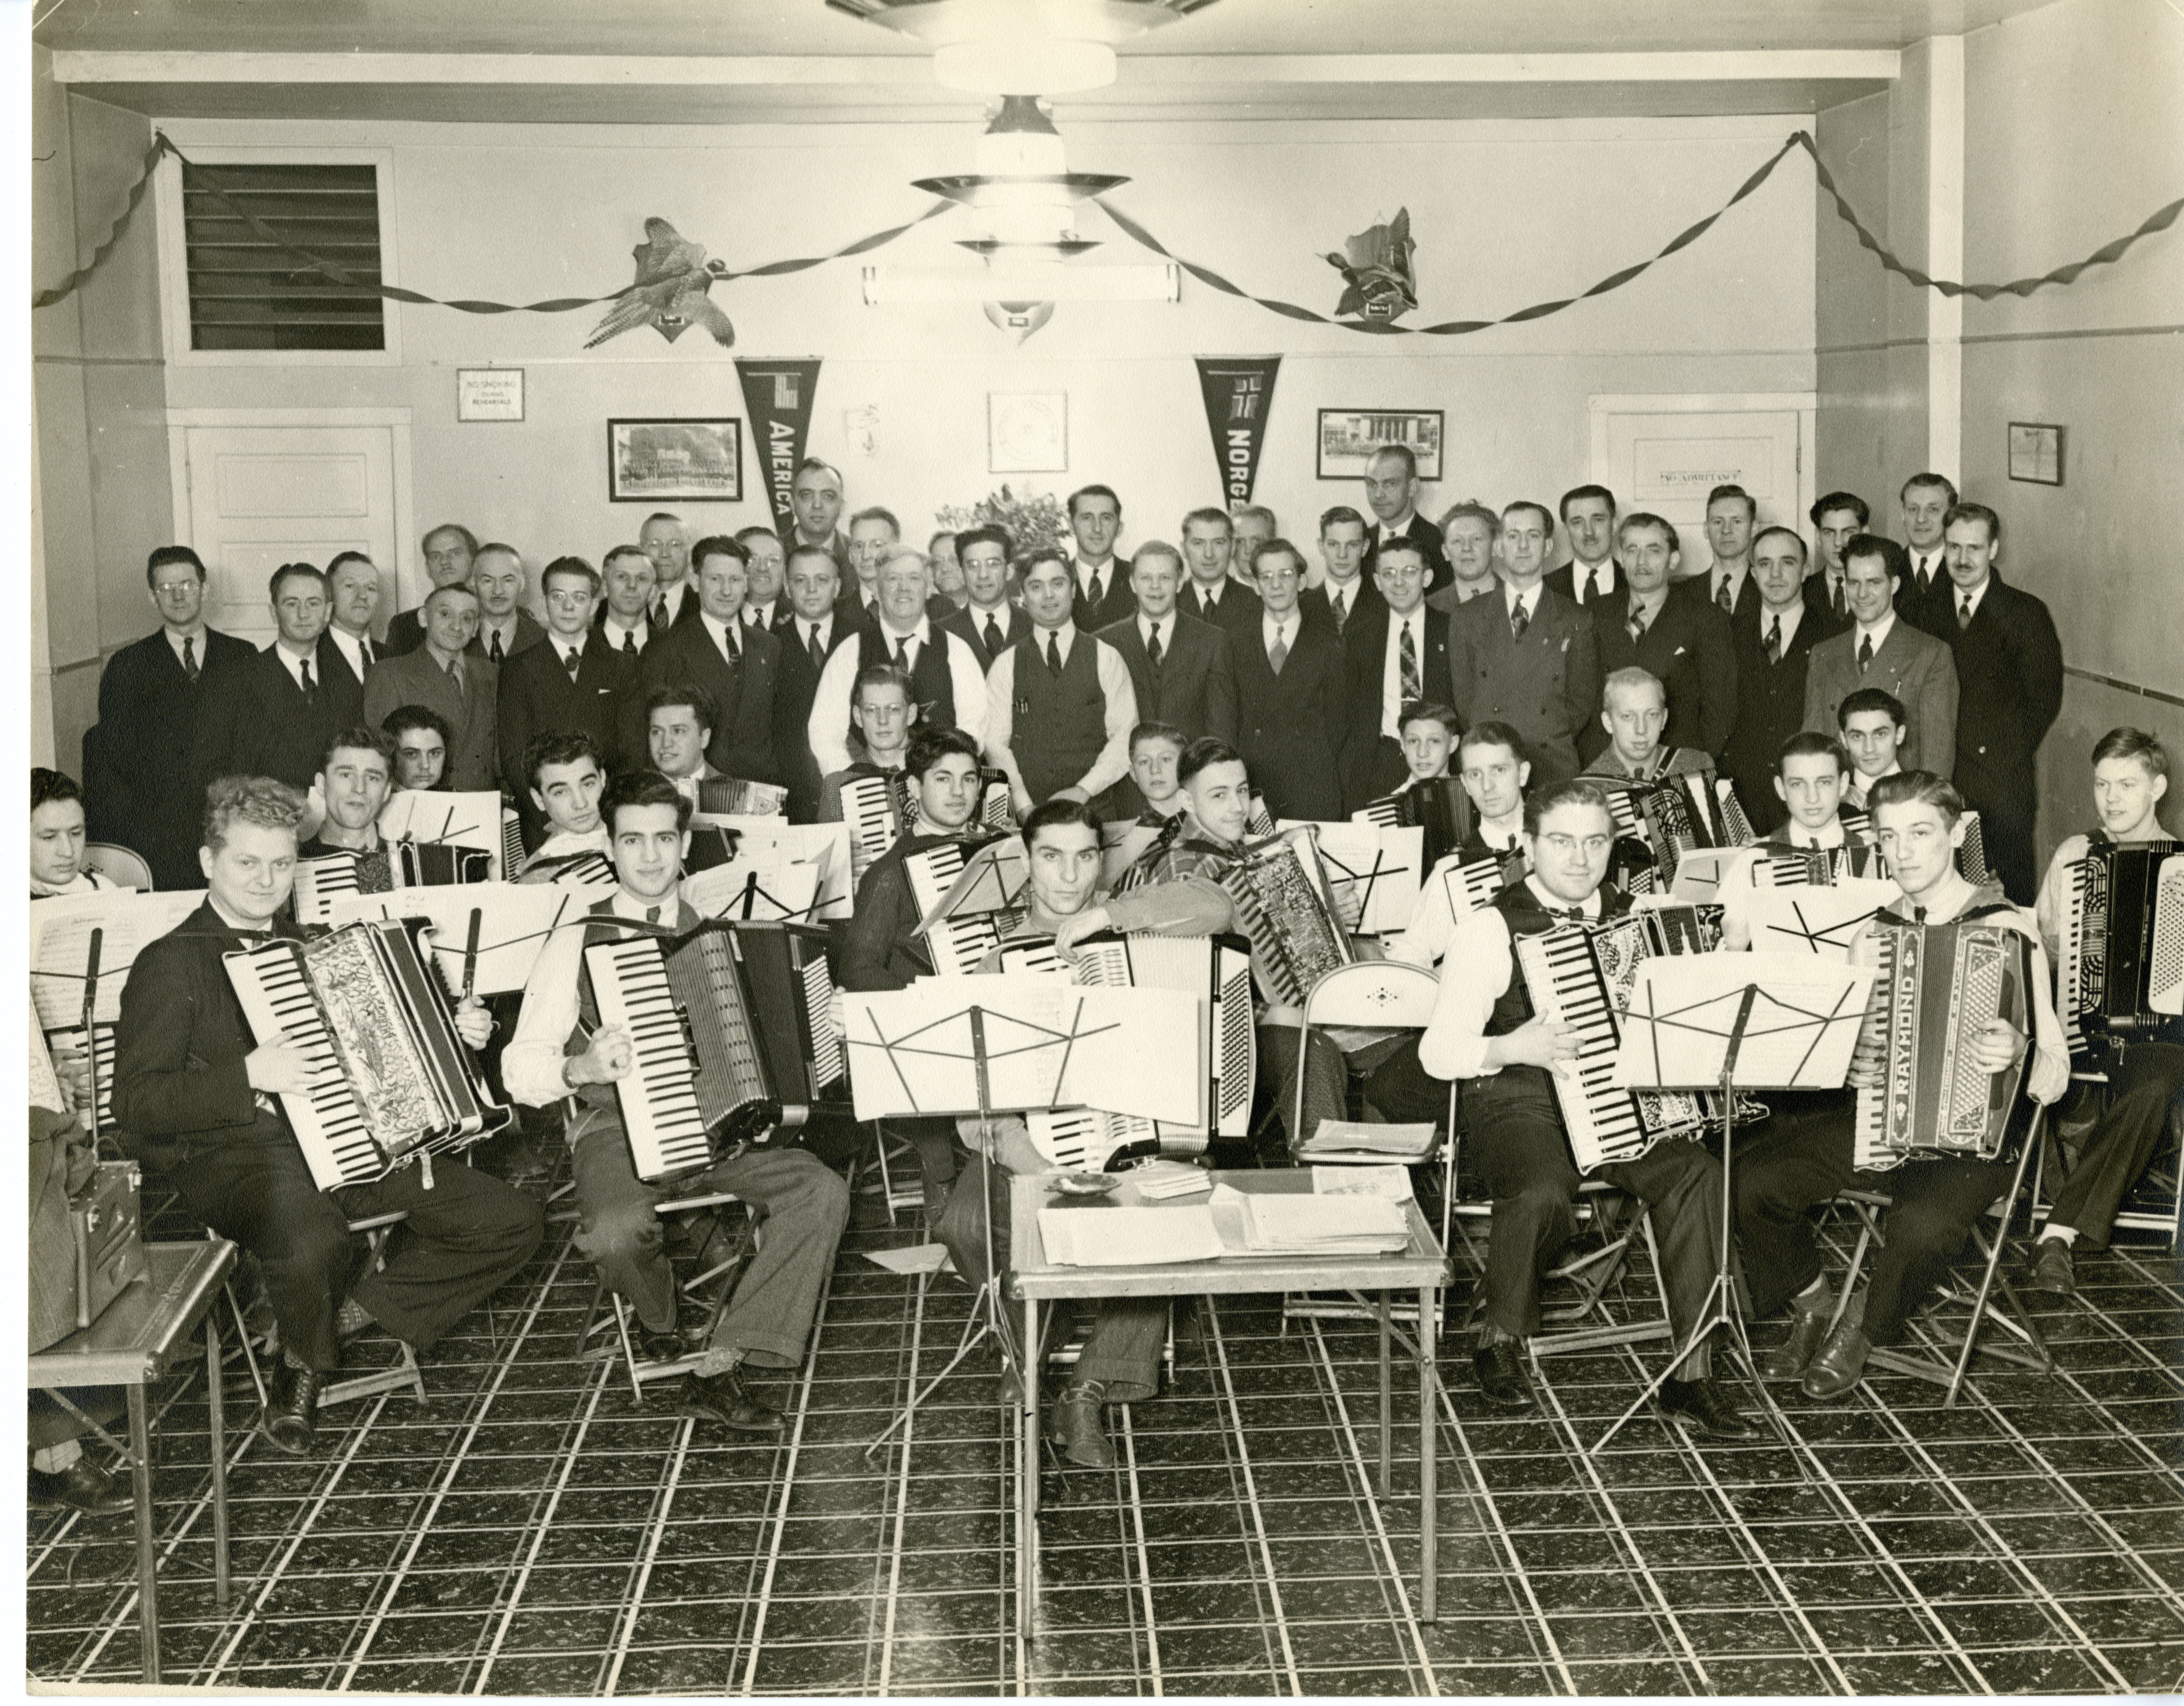 Large group of men inside for posed photo. The men in front are seated with accordion and are young and older men stand behind them.